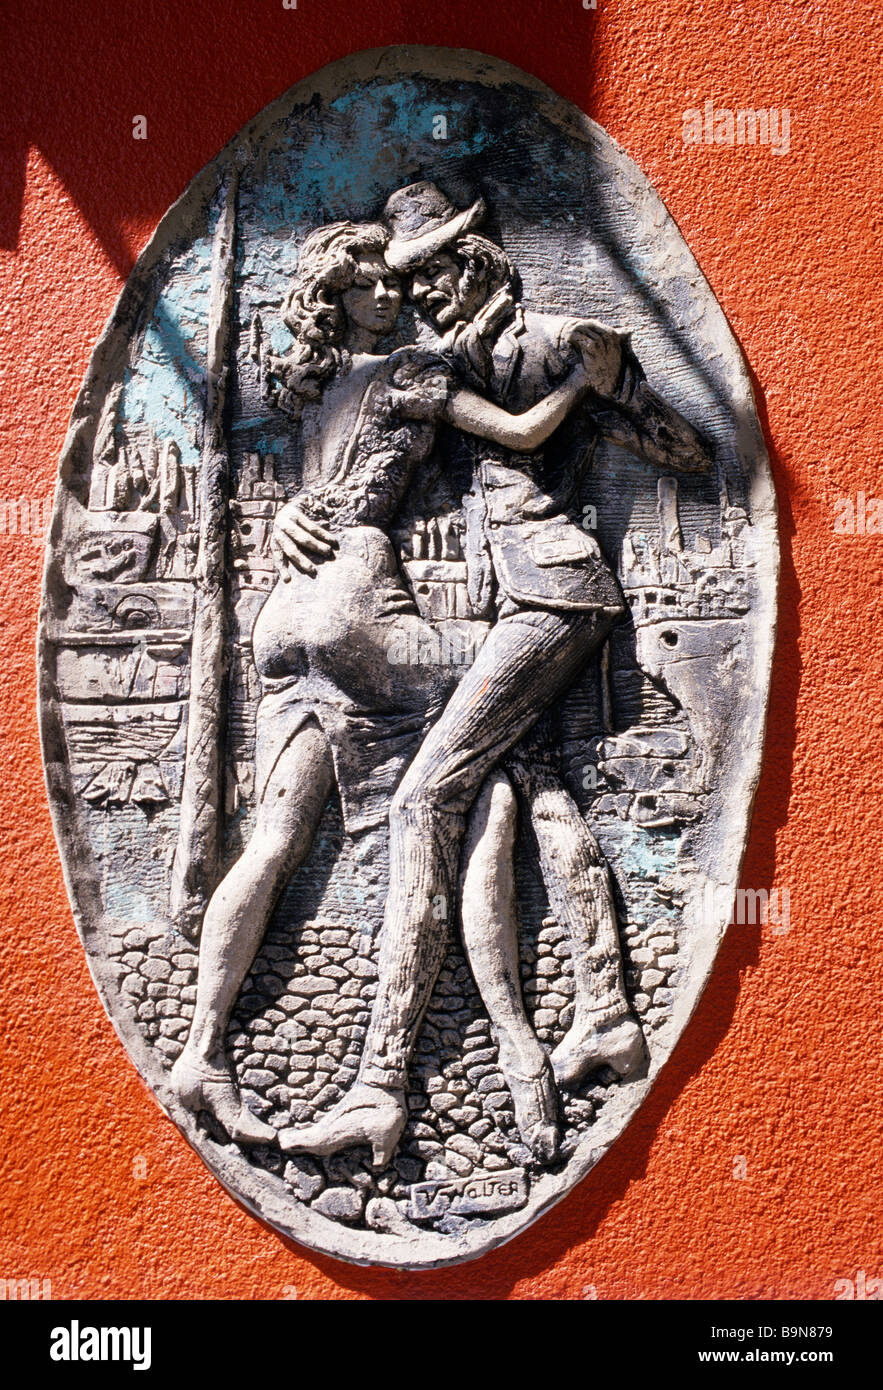 Argentina, Buenos Aires, La Boca district, sculpture on the theme of tango at the Caminito Stock Photo